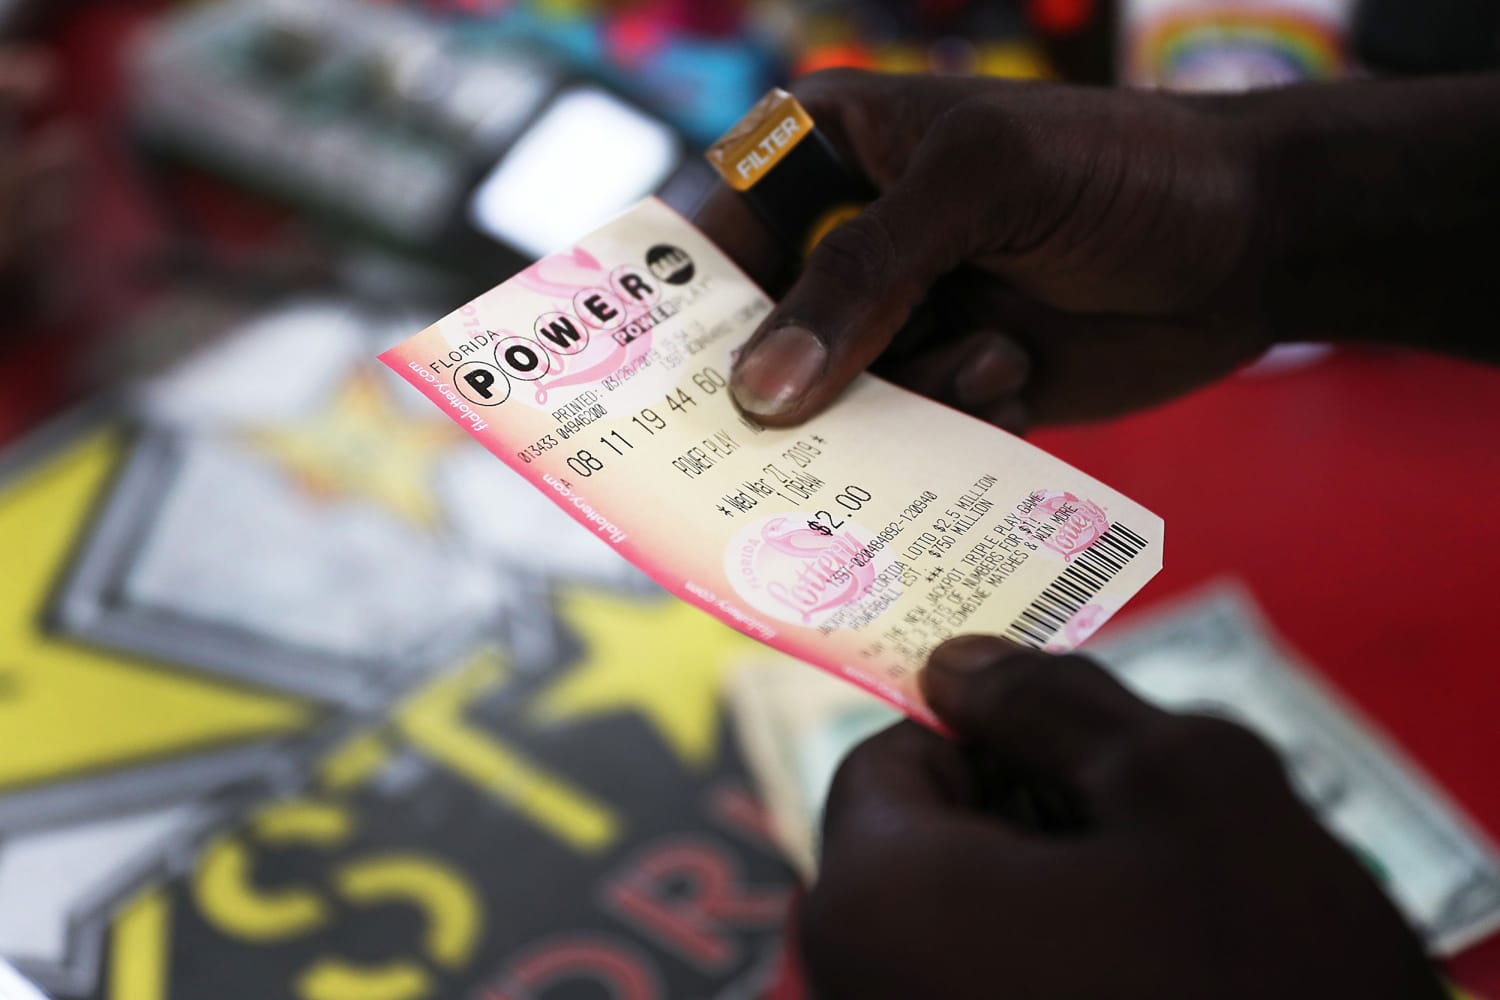 Two winning tickets for $632M Powerball jackpot sold in California, Wisconsin